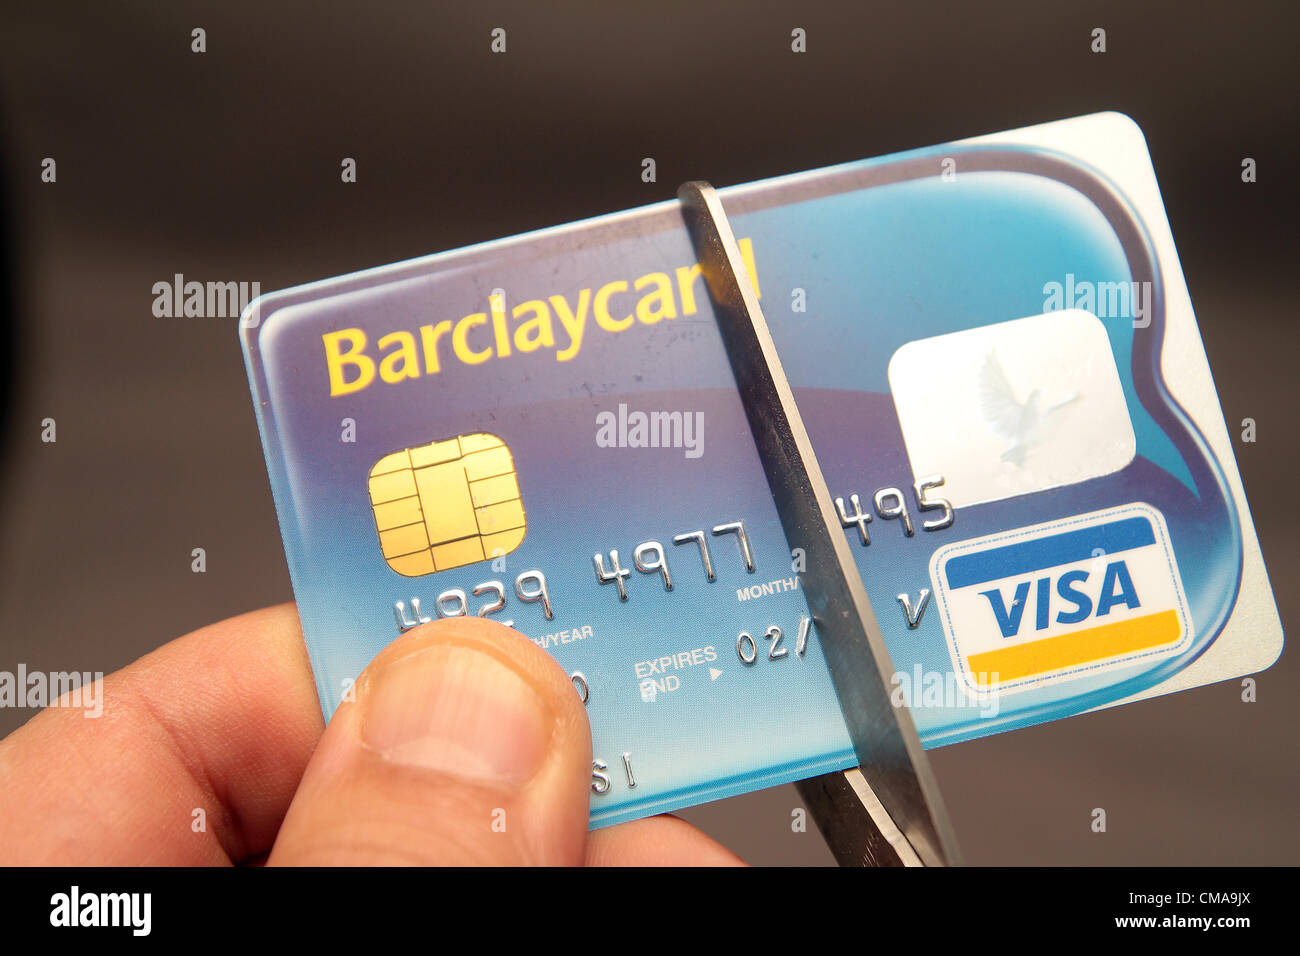 Mock Up Of A Barclaycard Credit Card Being Cut In Half In Protest Of Barclays Bank Libor Scandal In The United Kingdom Stock Photo Alamy